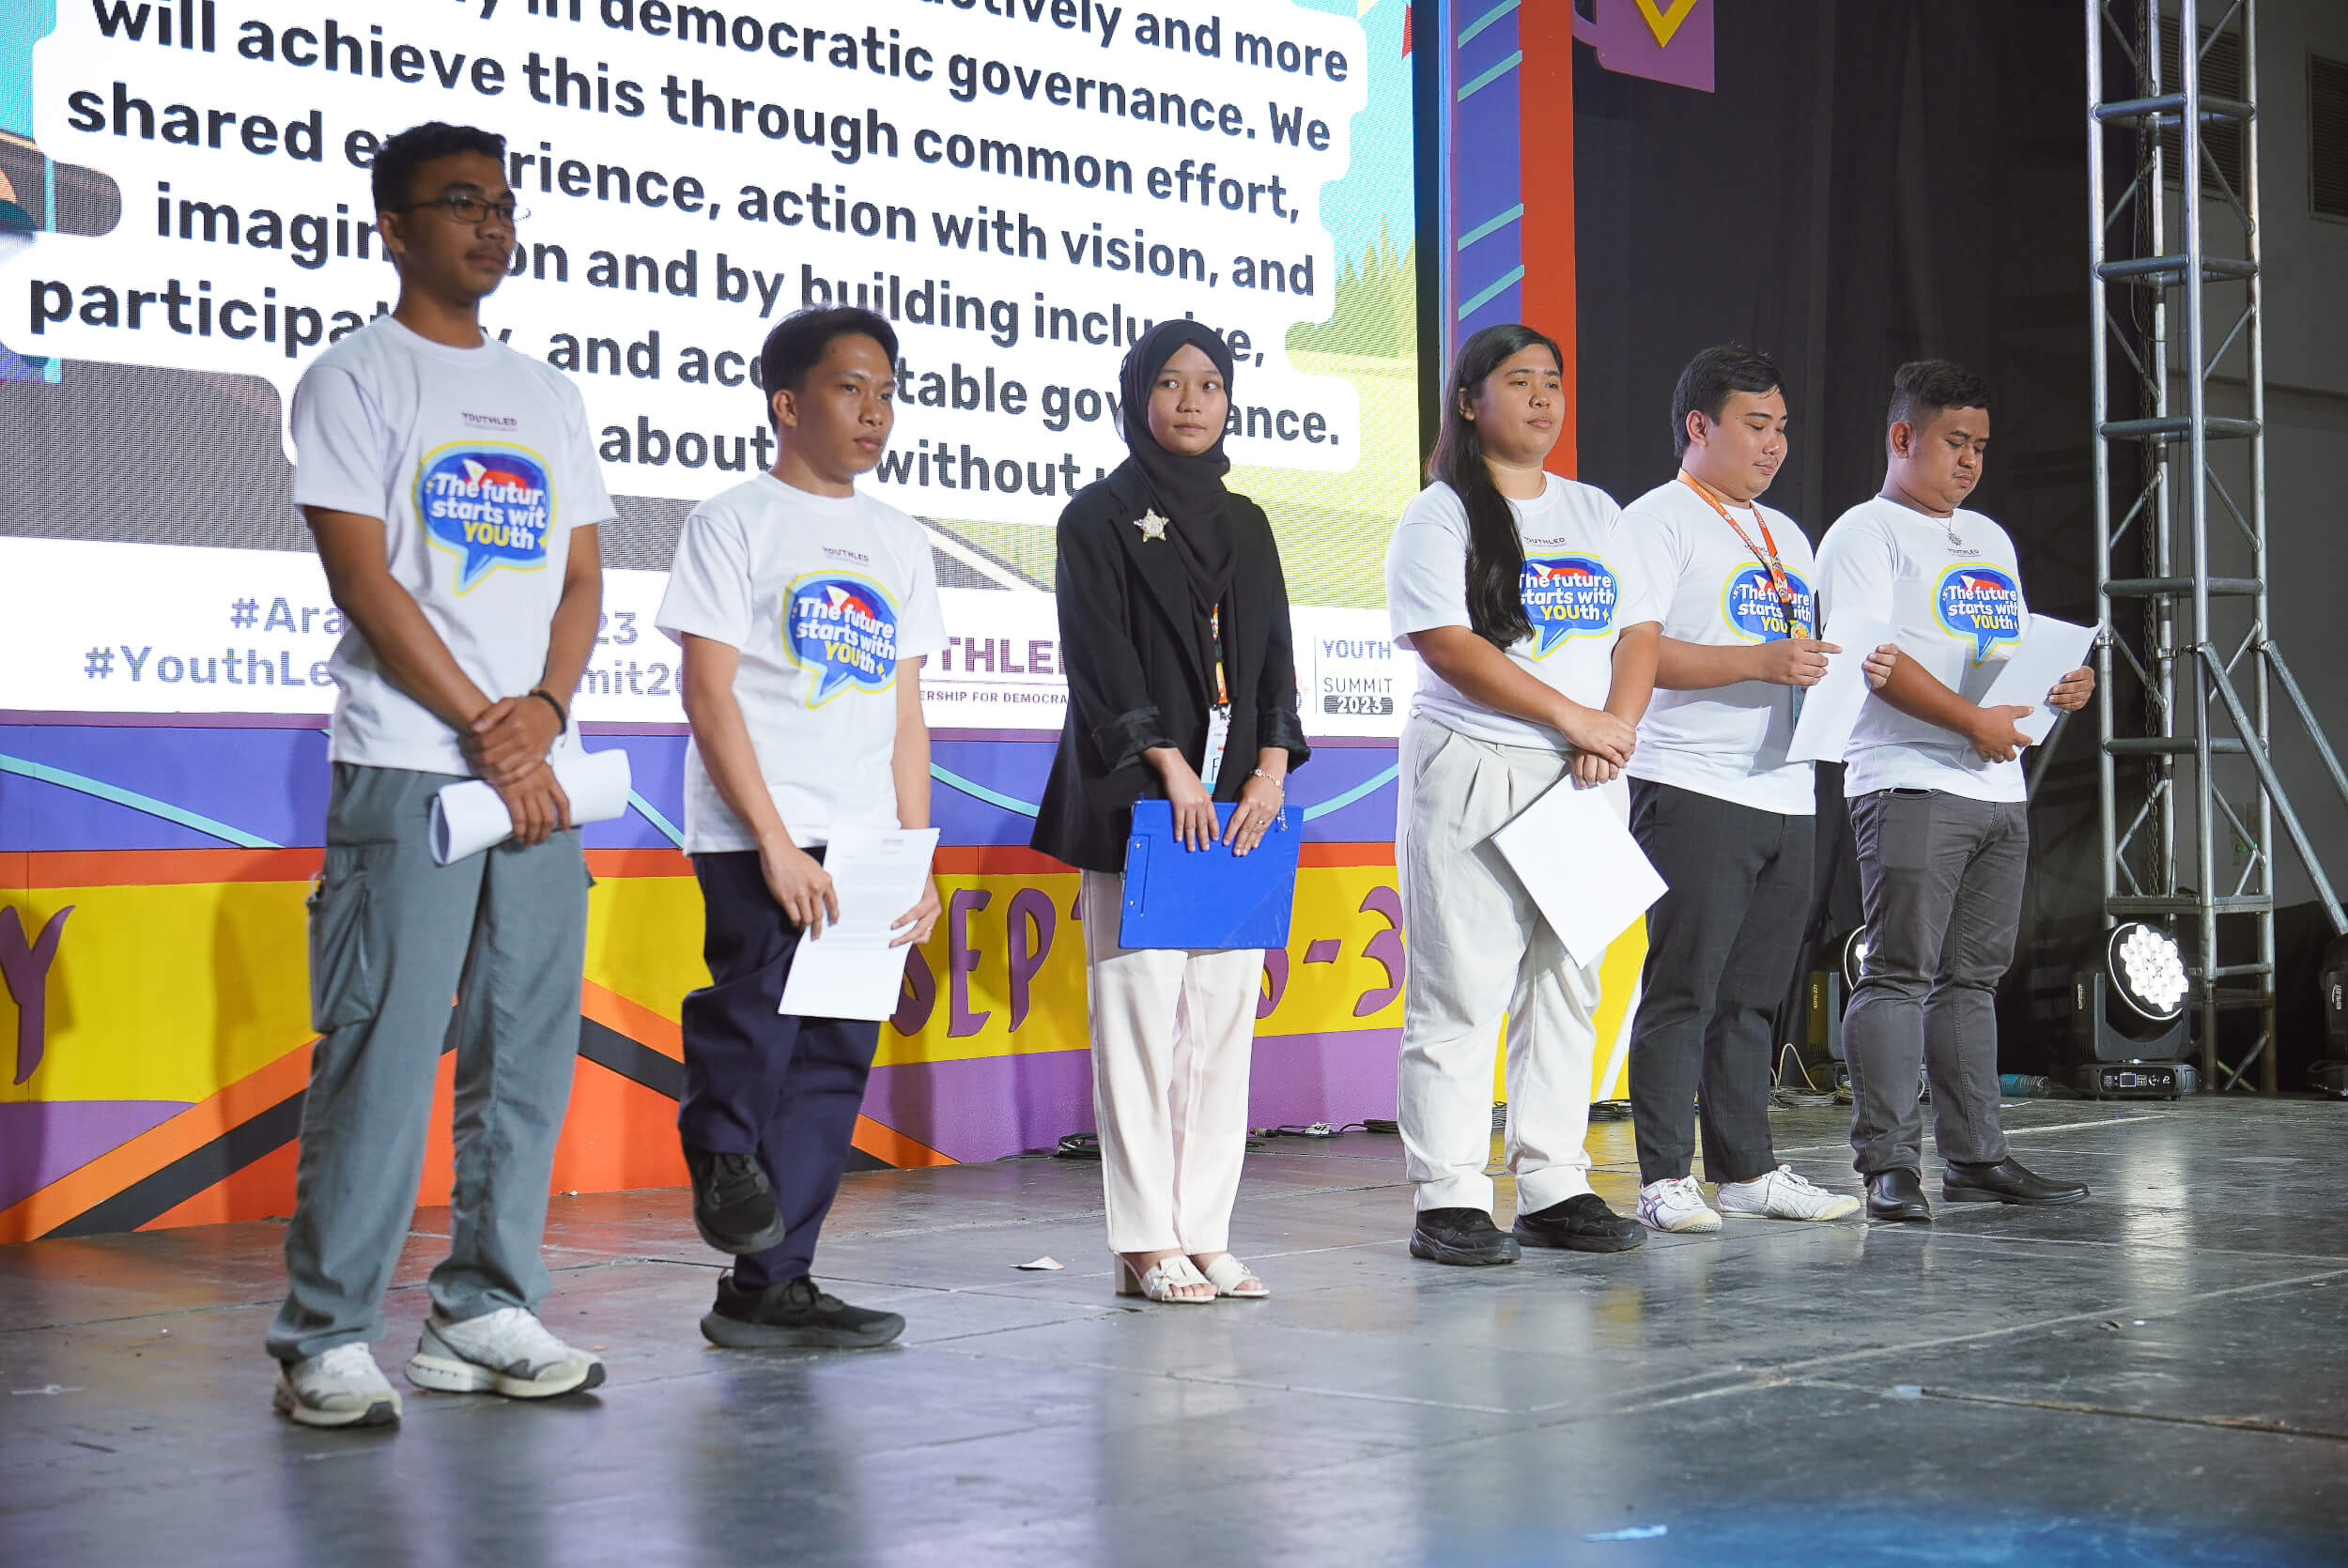 Youth representatives from different regions of the country lead the declaration of youth participation in democratic governance which reflects their current realities, aspirations, and calls for inclusive, participatory, and accountable governance. | Photo: YouthLed